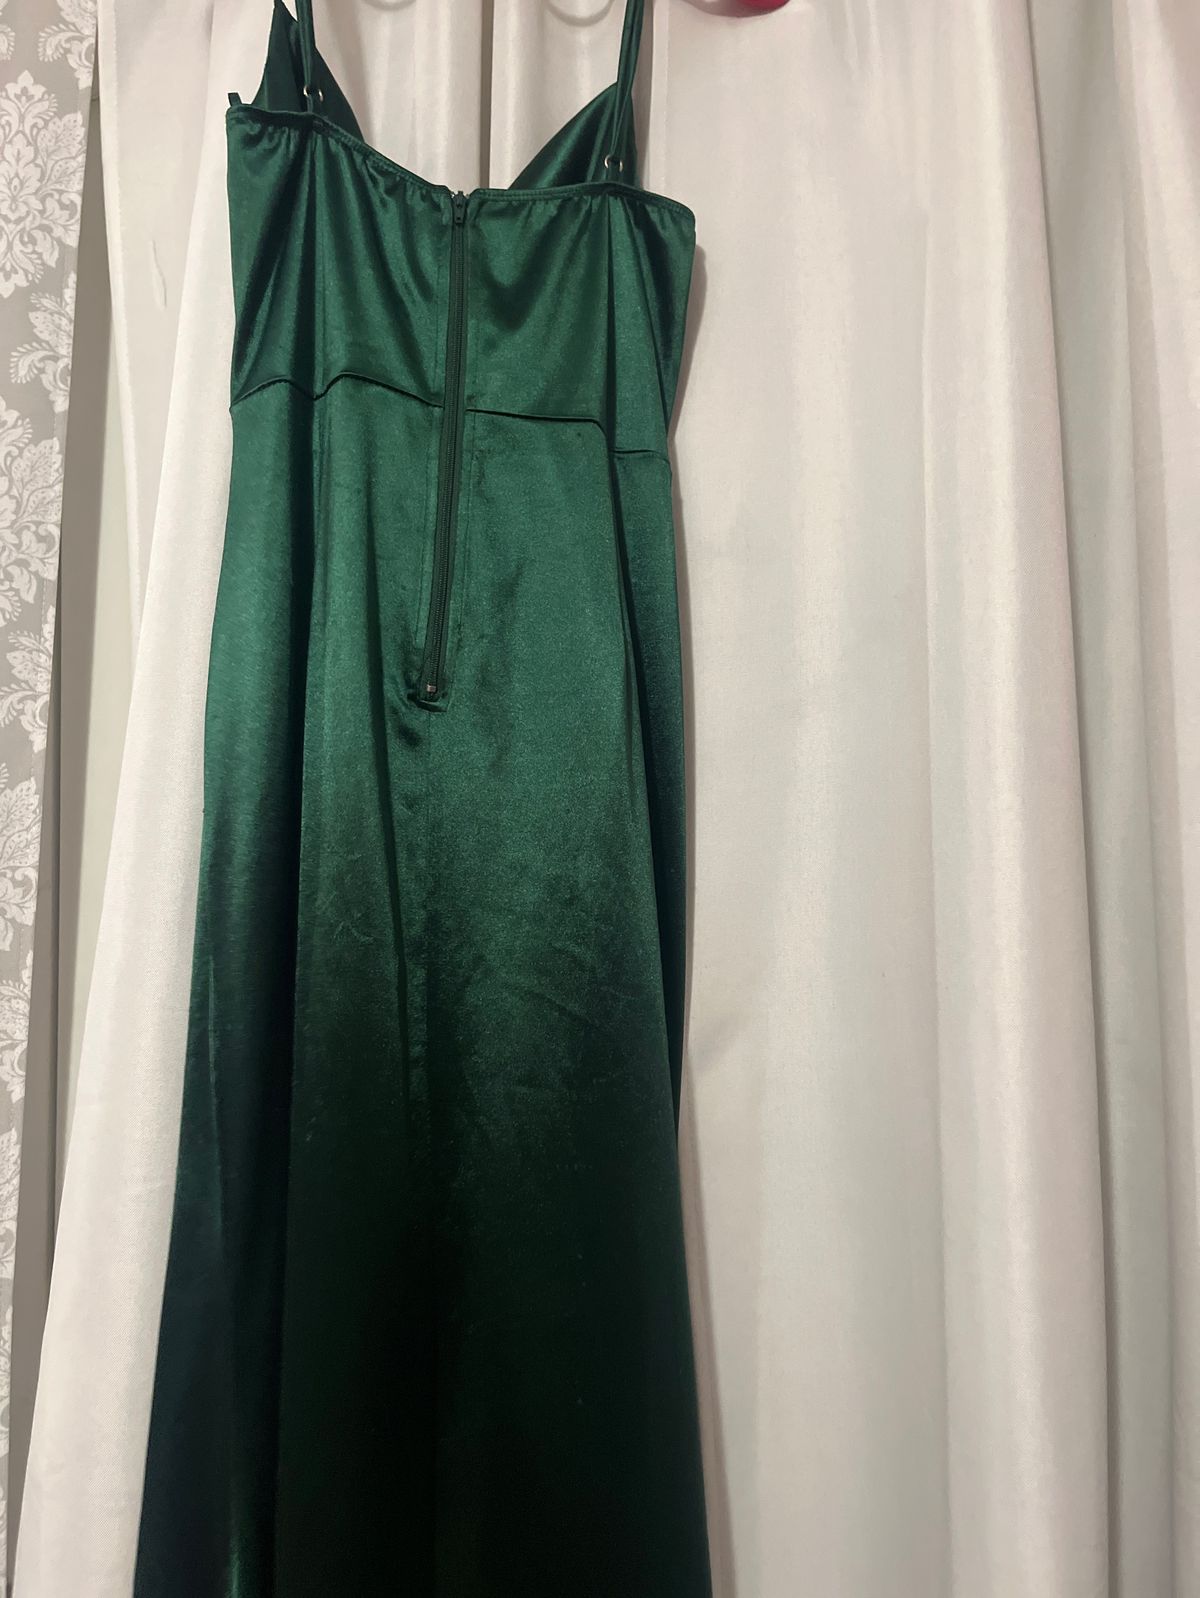 Size M Prom Green Mermaid Dress on Queenly